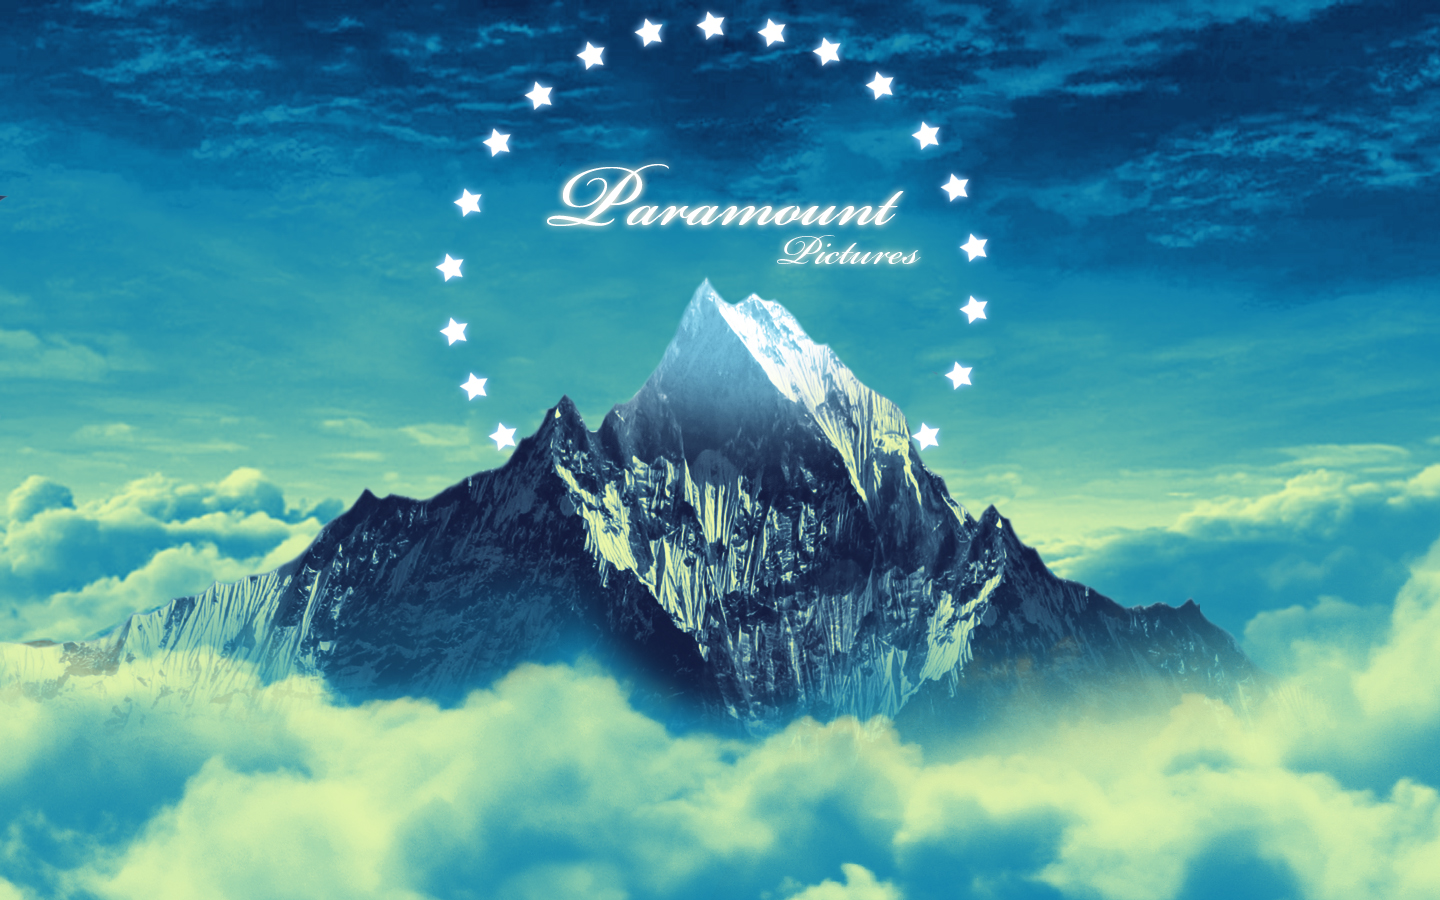 Paramount_Pictures_Logo_by_ioinme819283673.jpeg